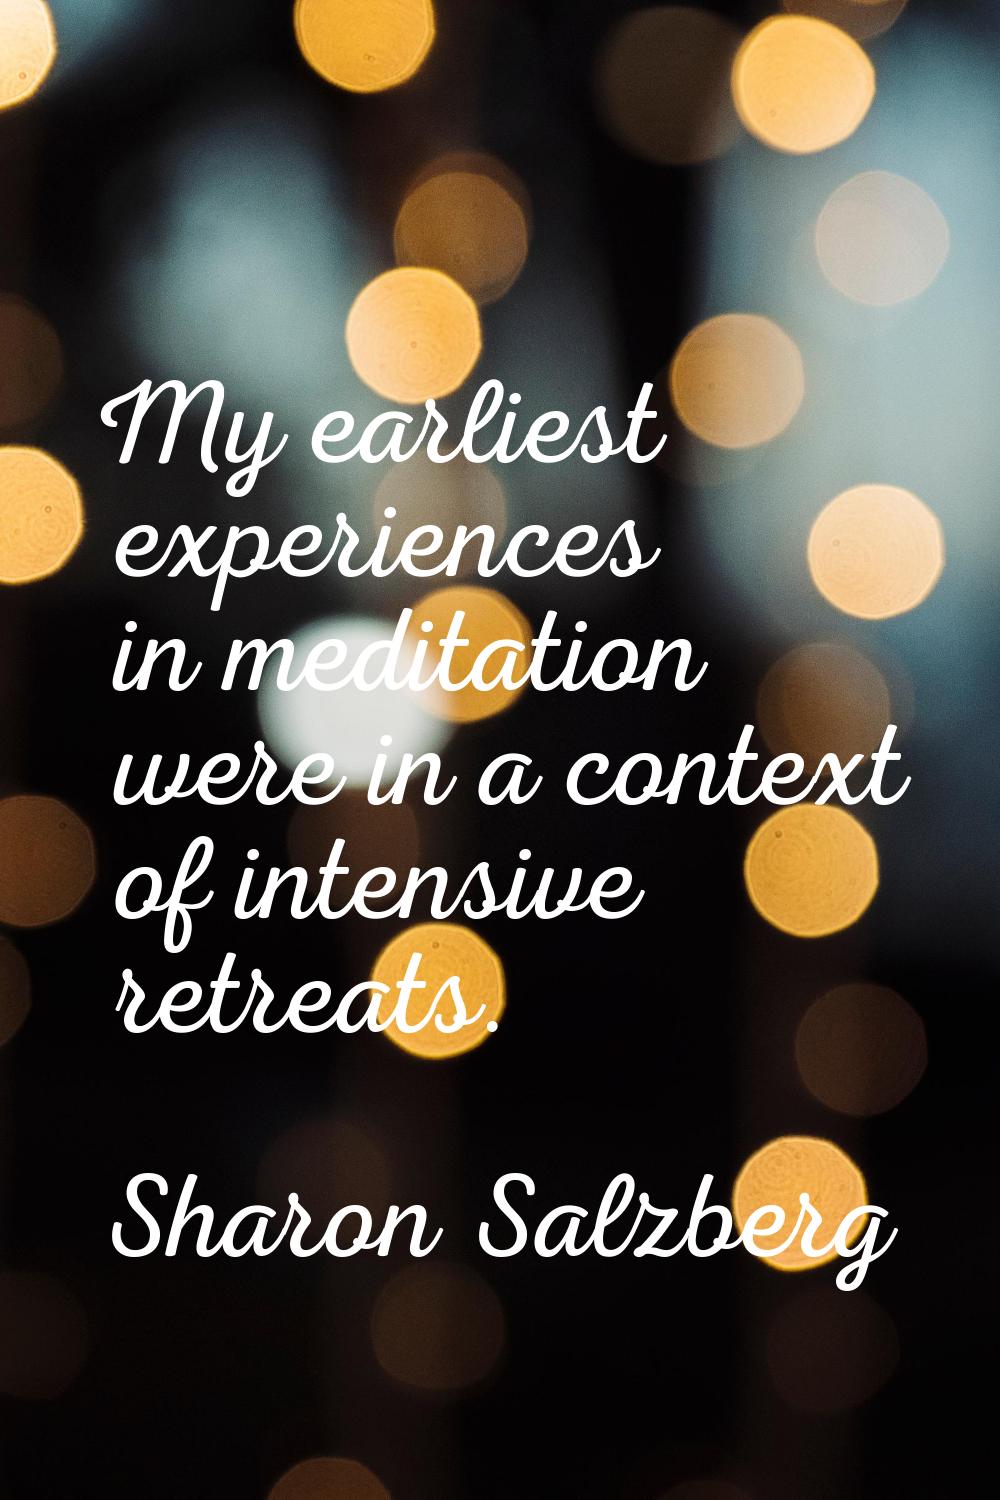 My earliest experiences in meditation were in a context of intensive retreats.